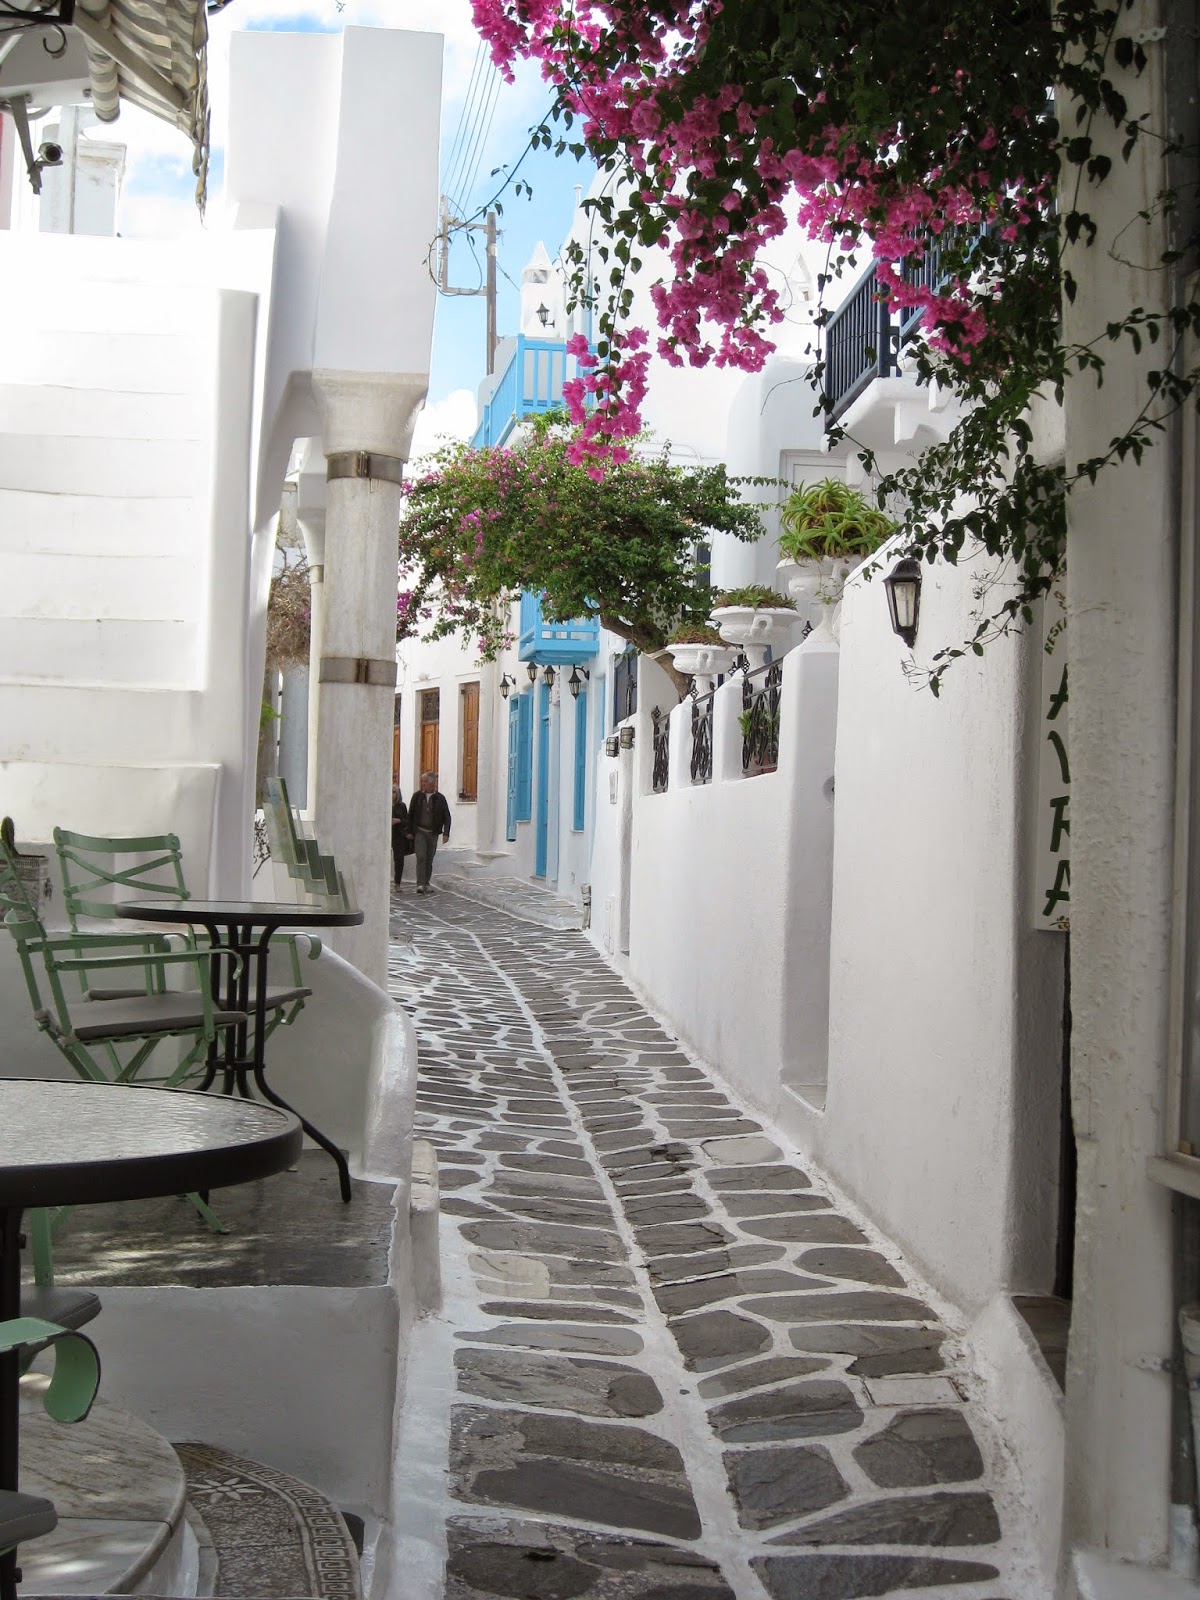 Mykonos - Beautifully maintained buildings